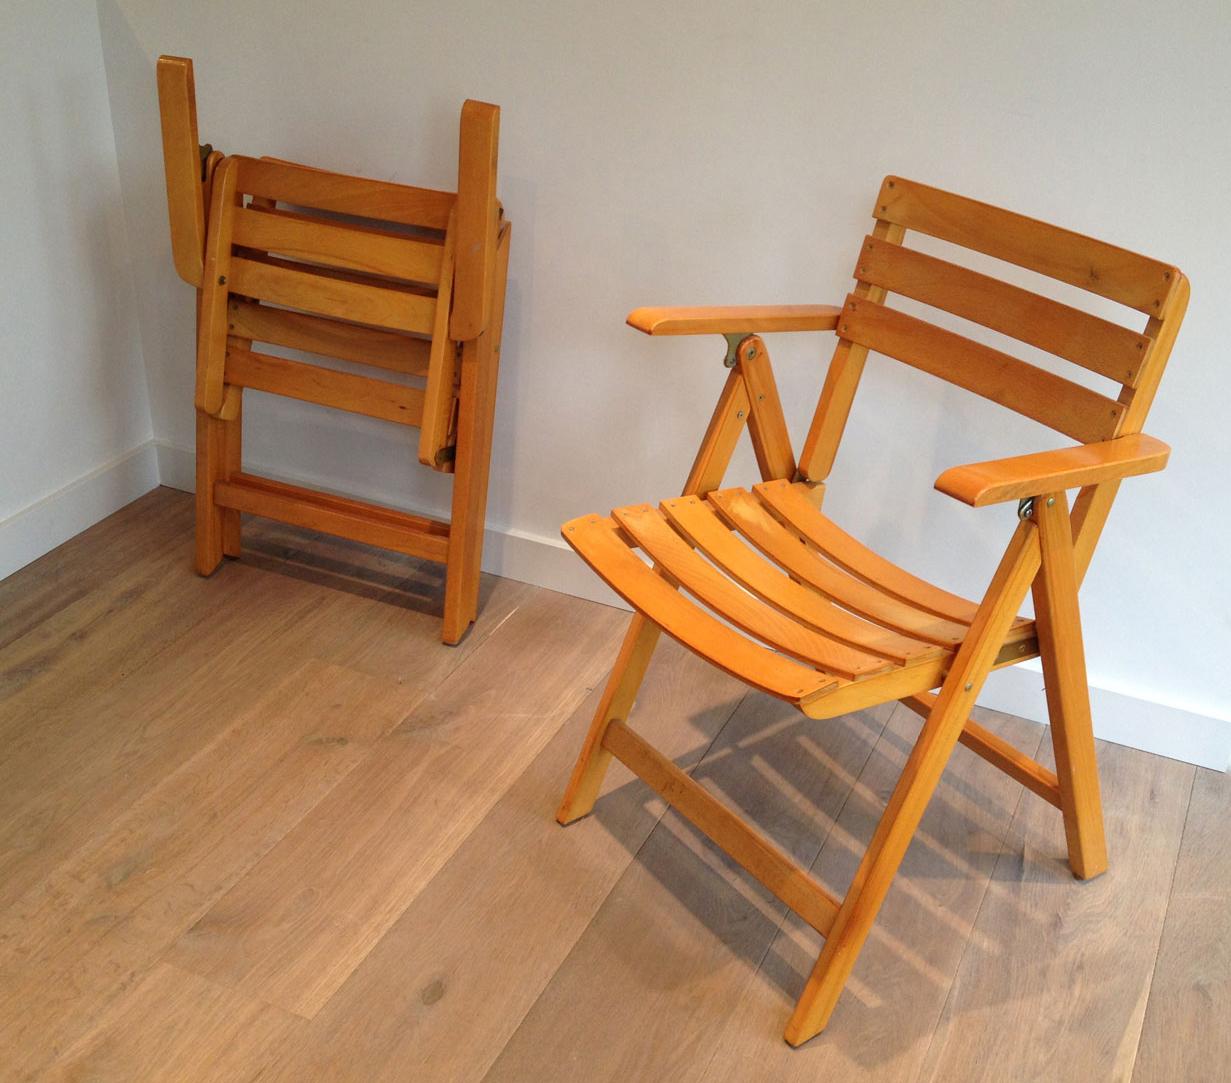 Pair of Wooden Armchairs, French Work Signed Clairitex, Circa 1970 In Good Condition For Sale In Marcq-en-Barœul, Hauts-de-France